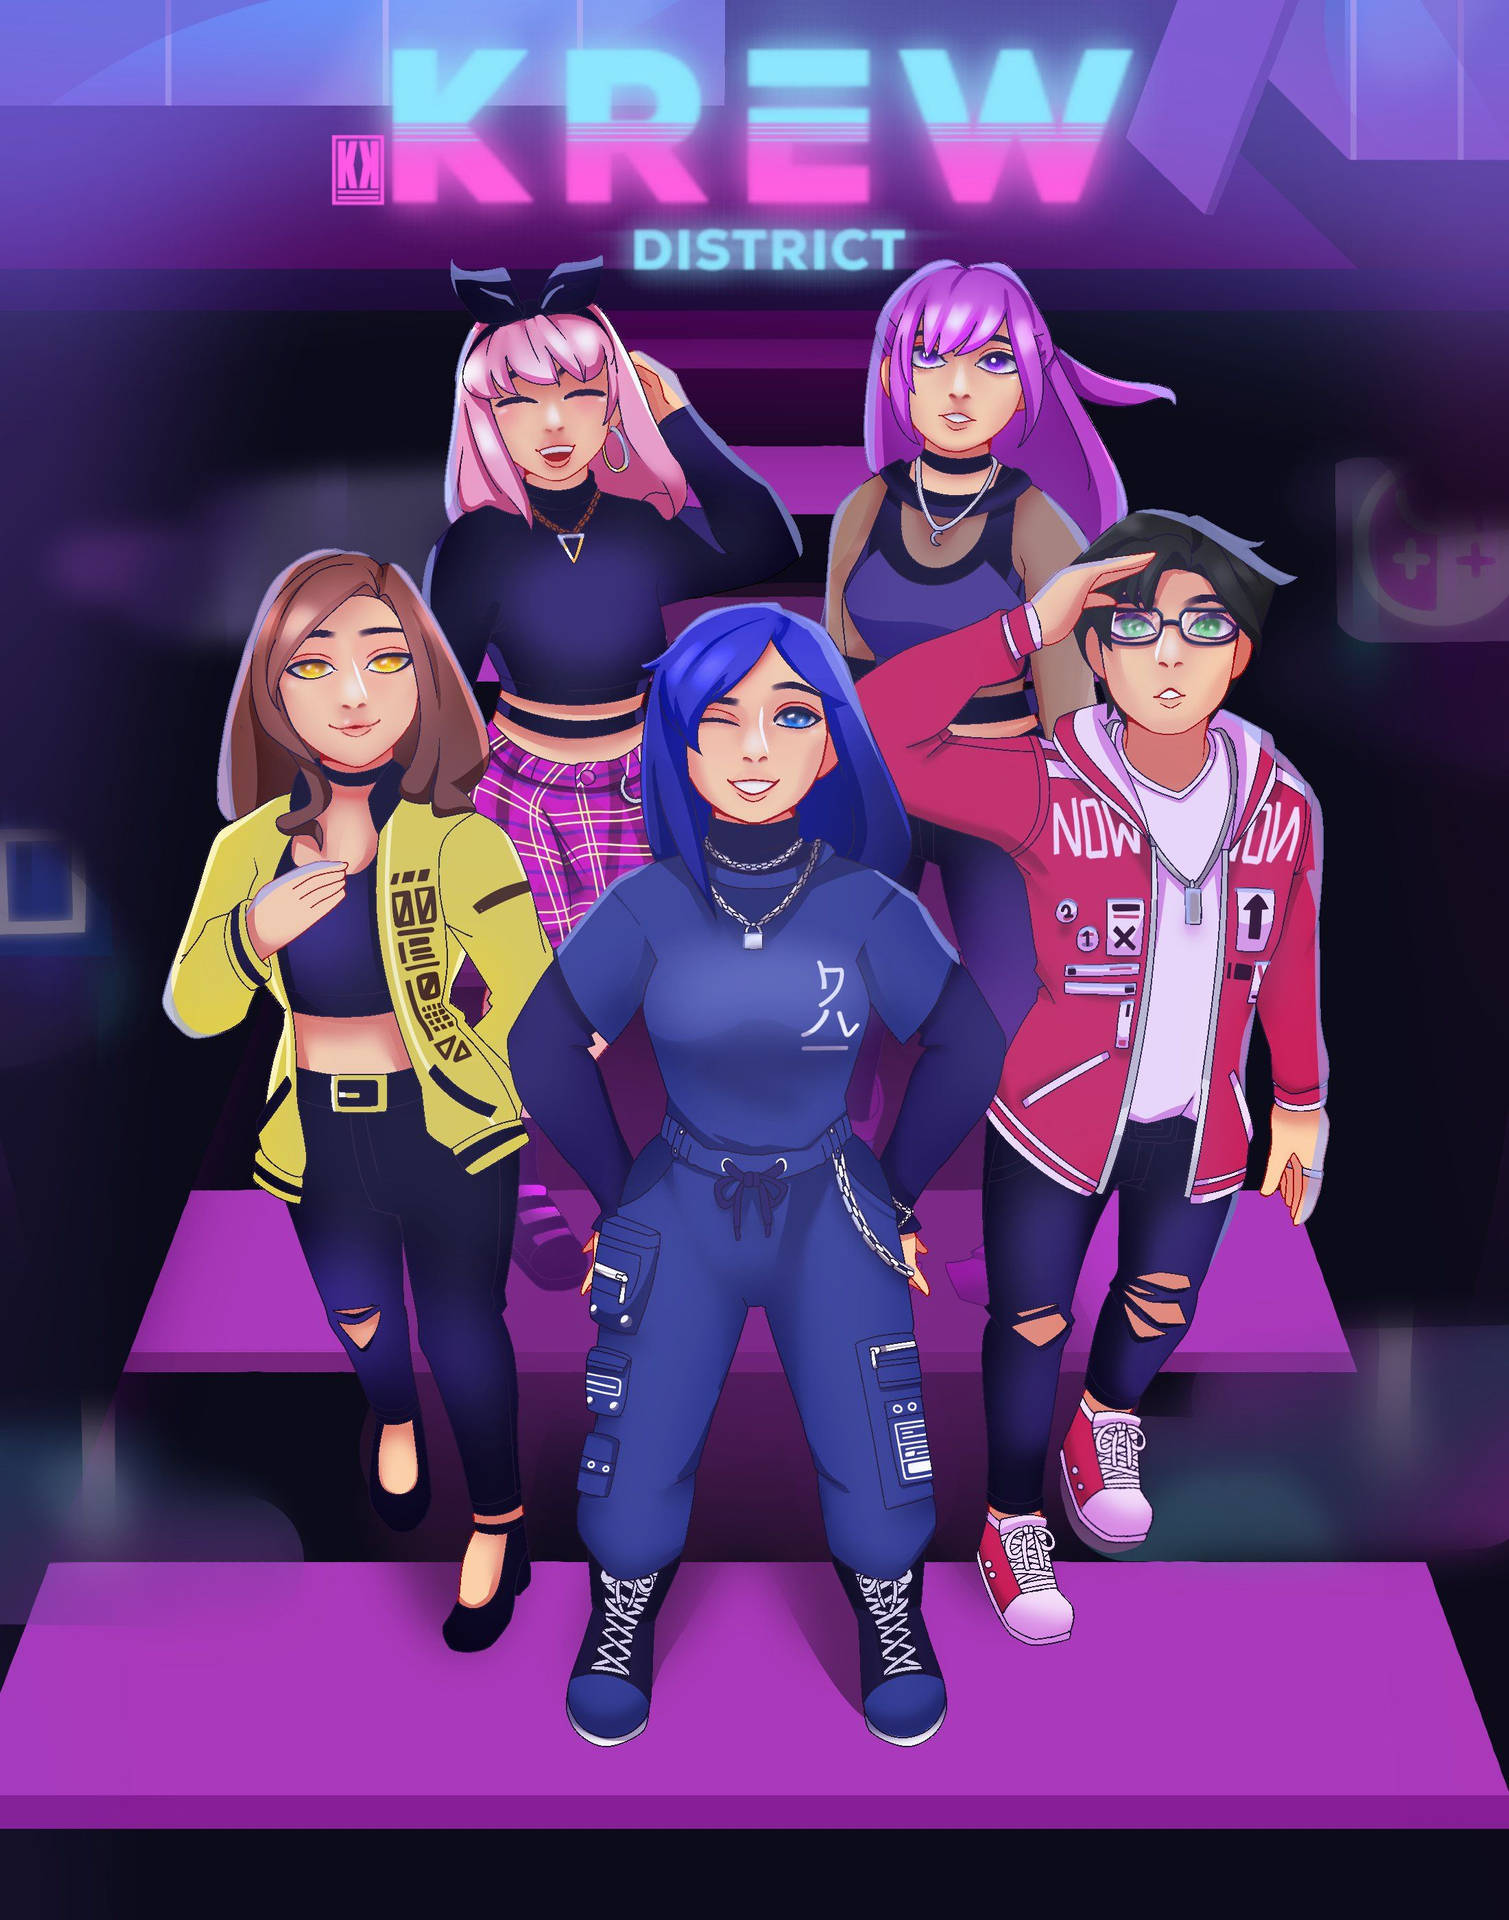 The Krew District Background